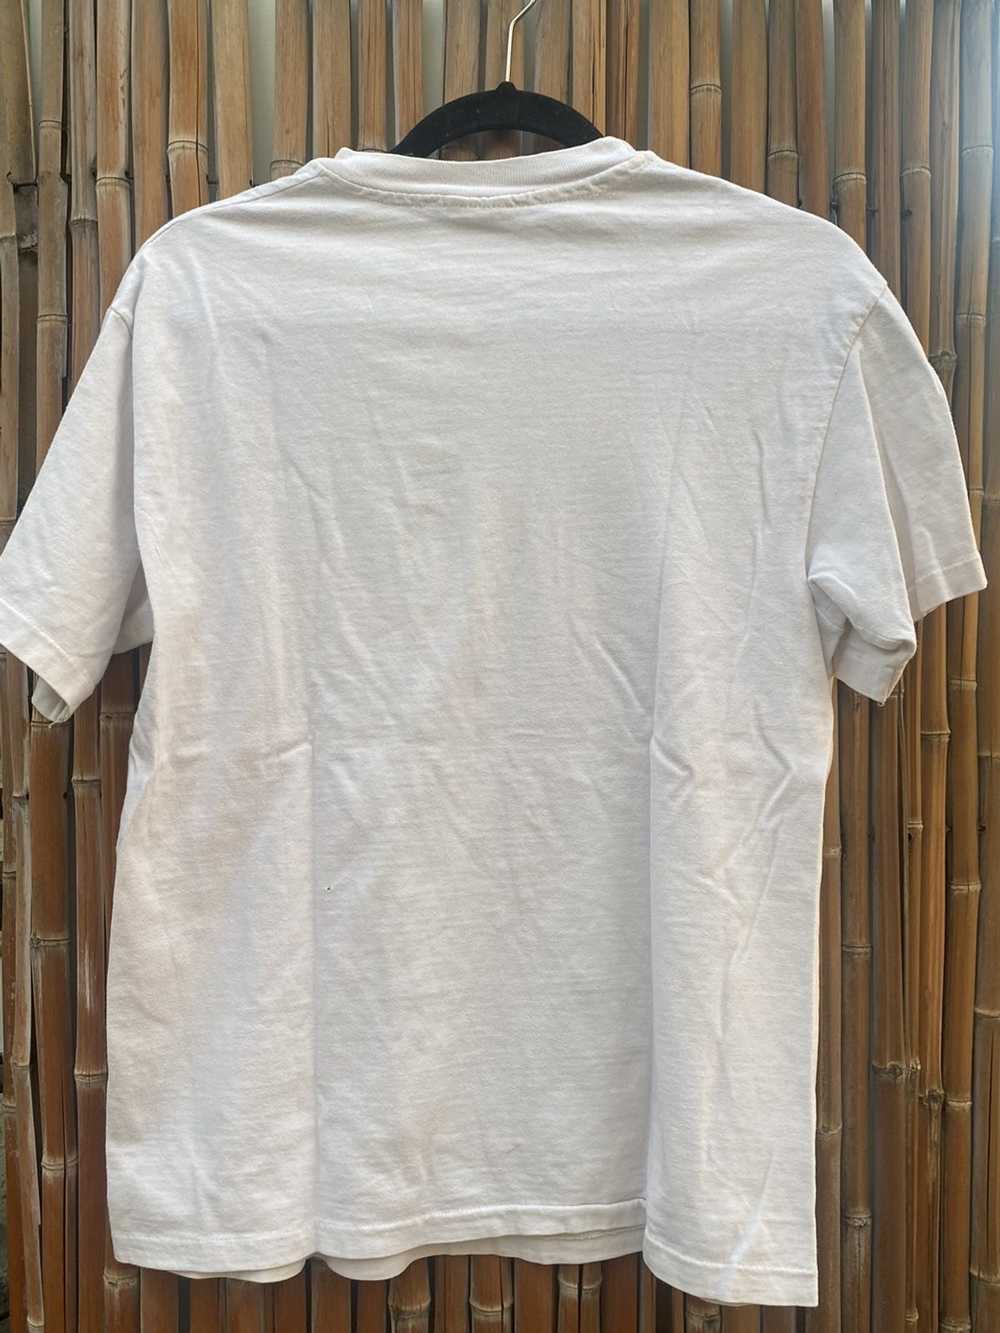 Urban Outfitters Greenwich village white tee - image 2